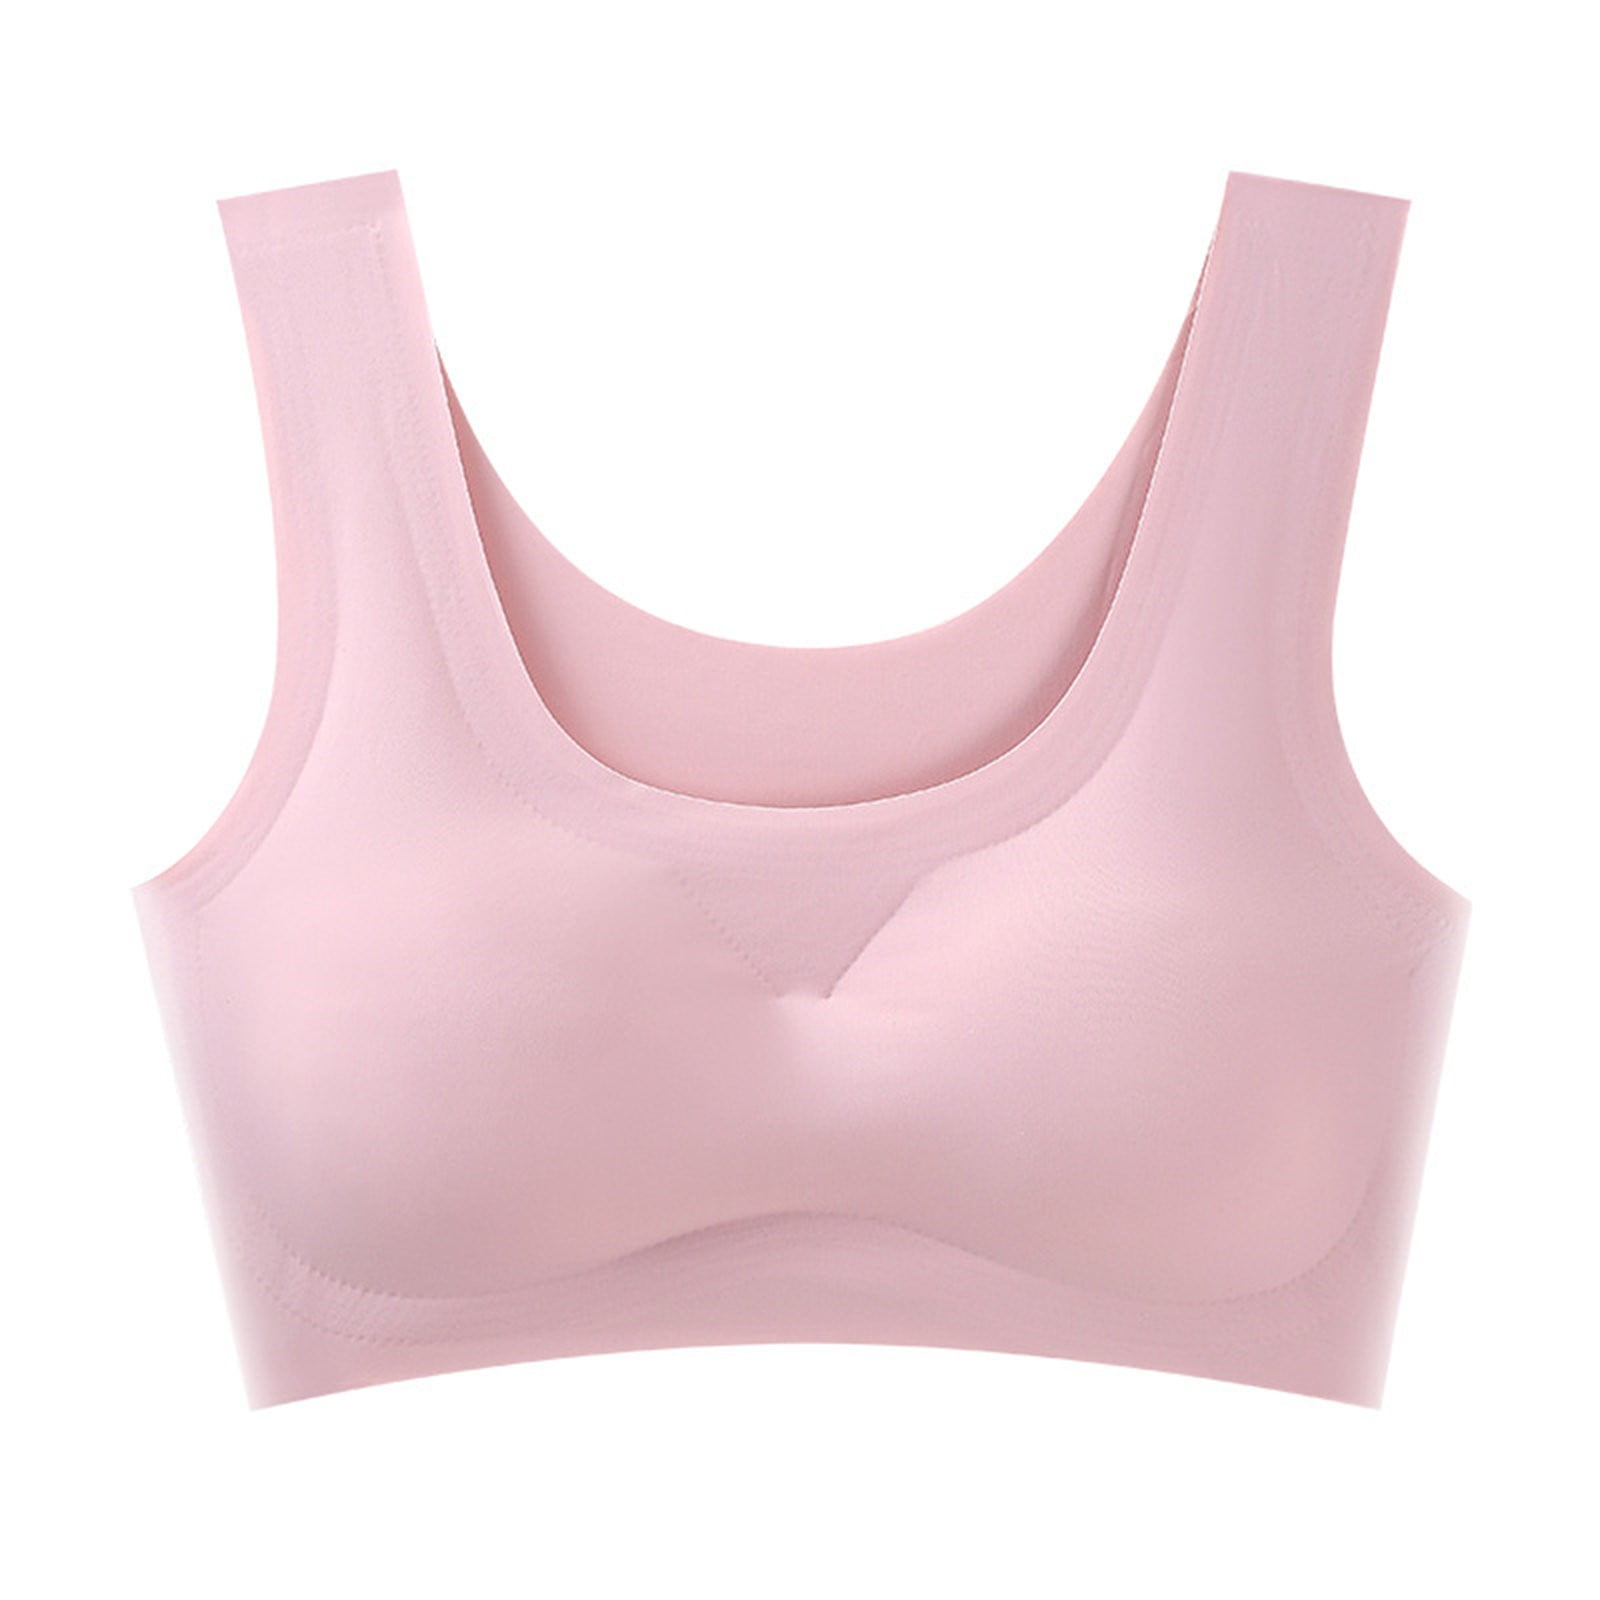 EHQJNJ Sports Bras for Women High Support Underwire Ultra Thin